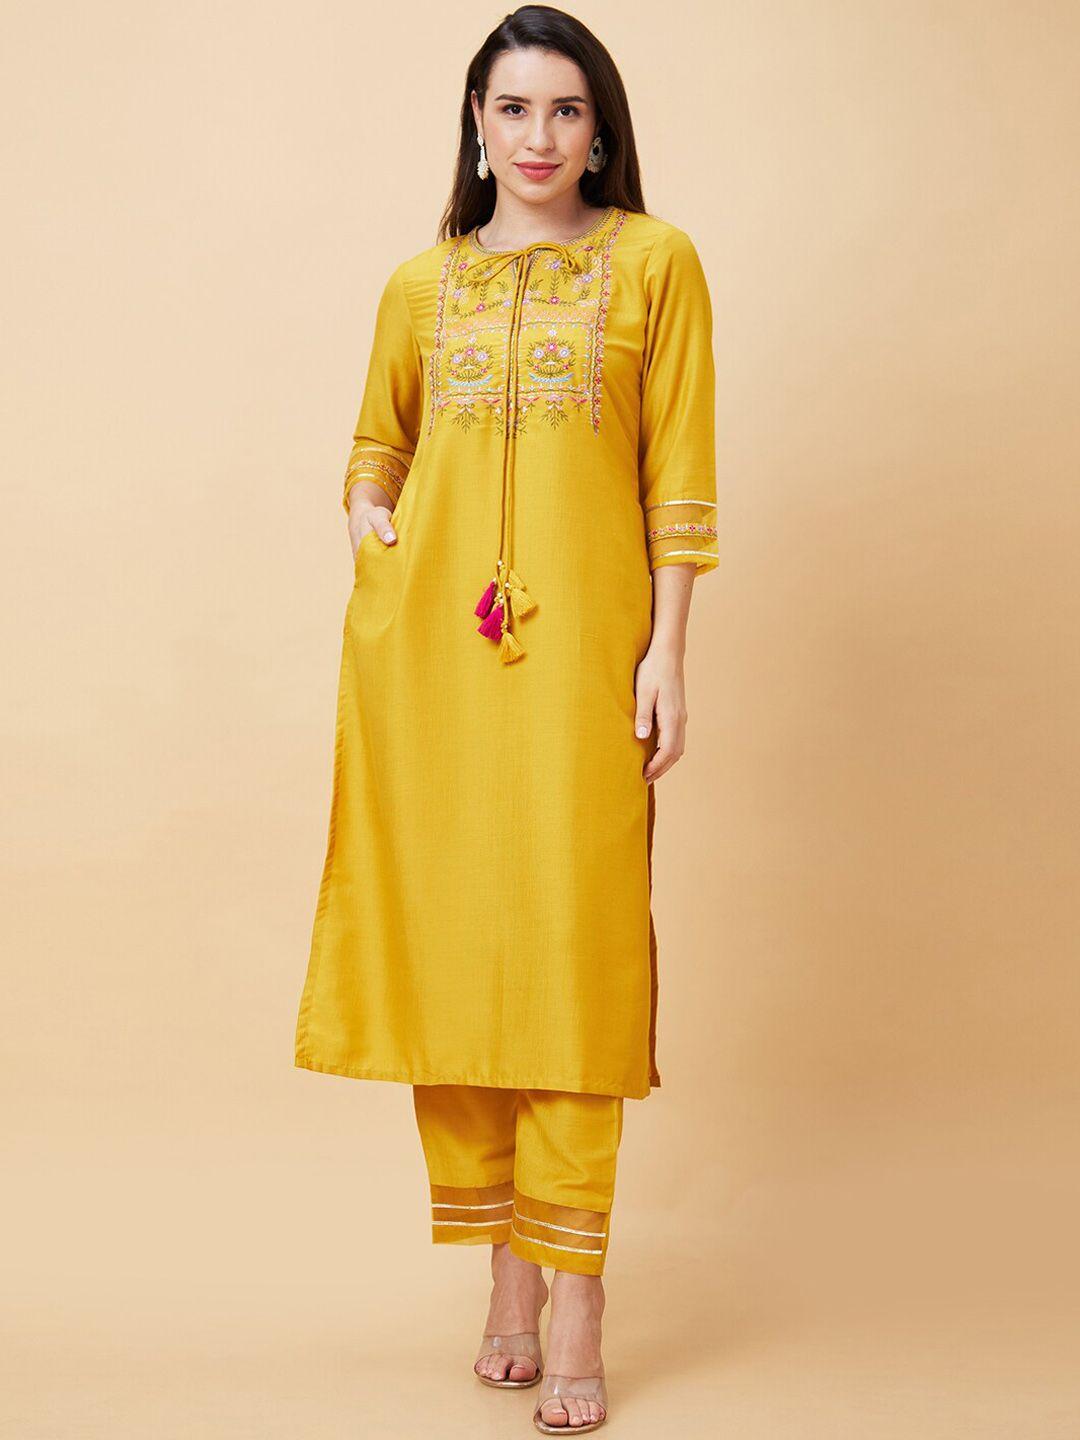 globus yellow floral embroidered keyhole neck regular straight kurta with trousers